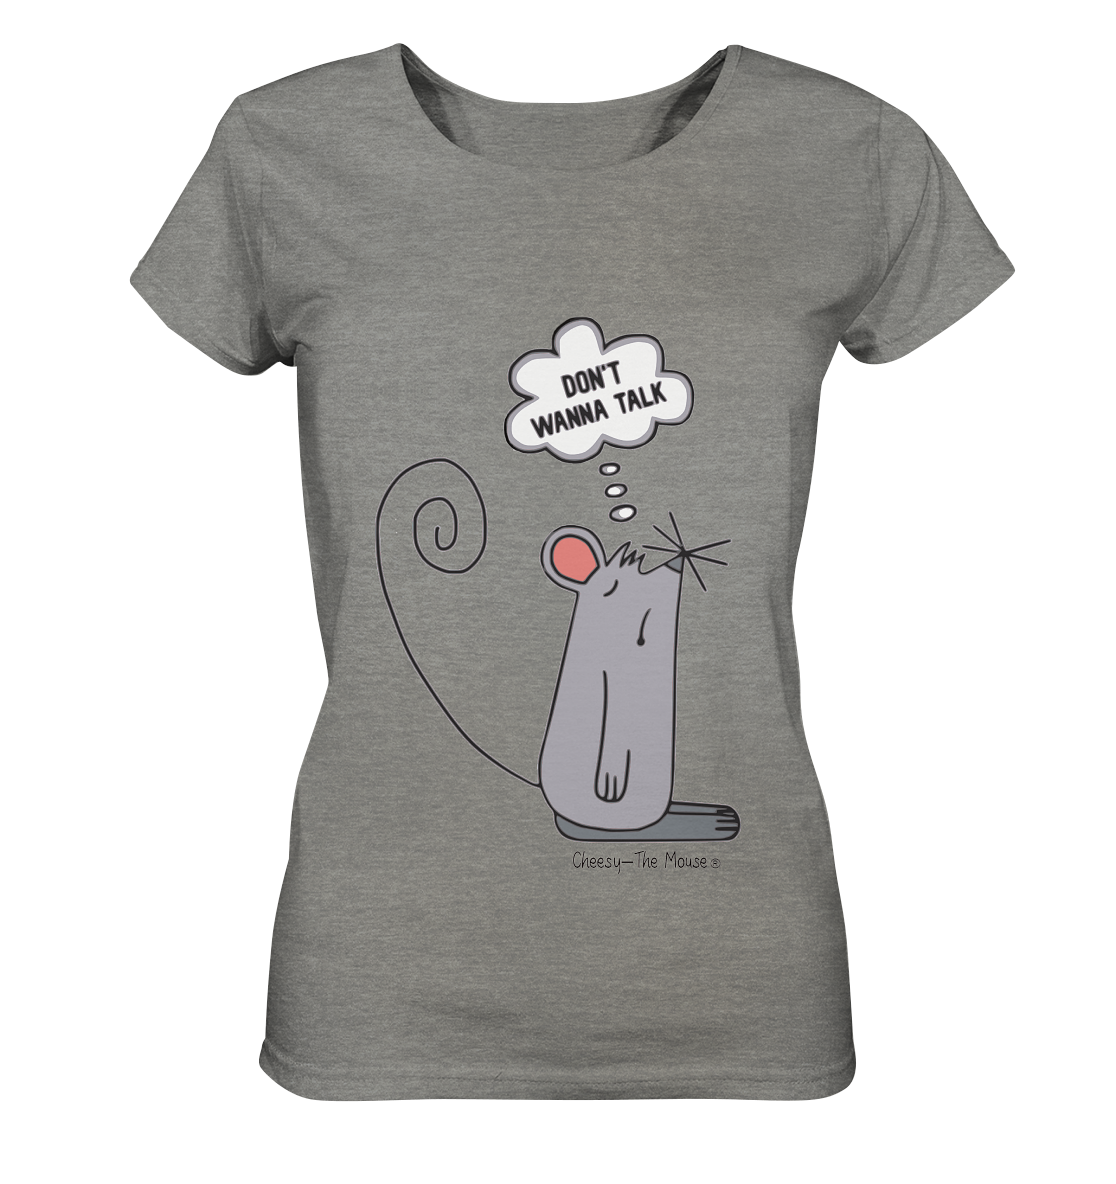 Cheesy The Mouse - Ladies Organic Shirt (meliert)